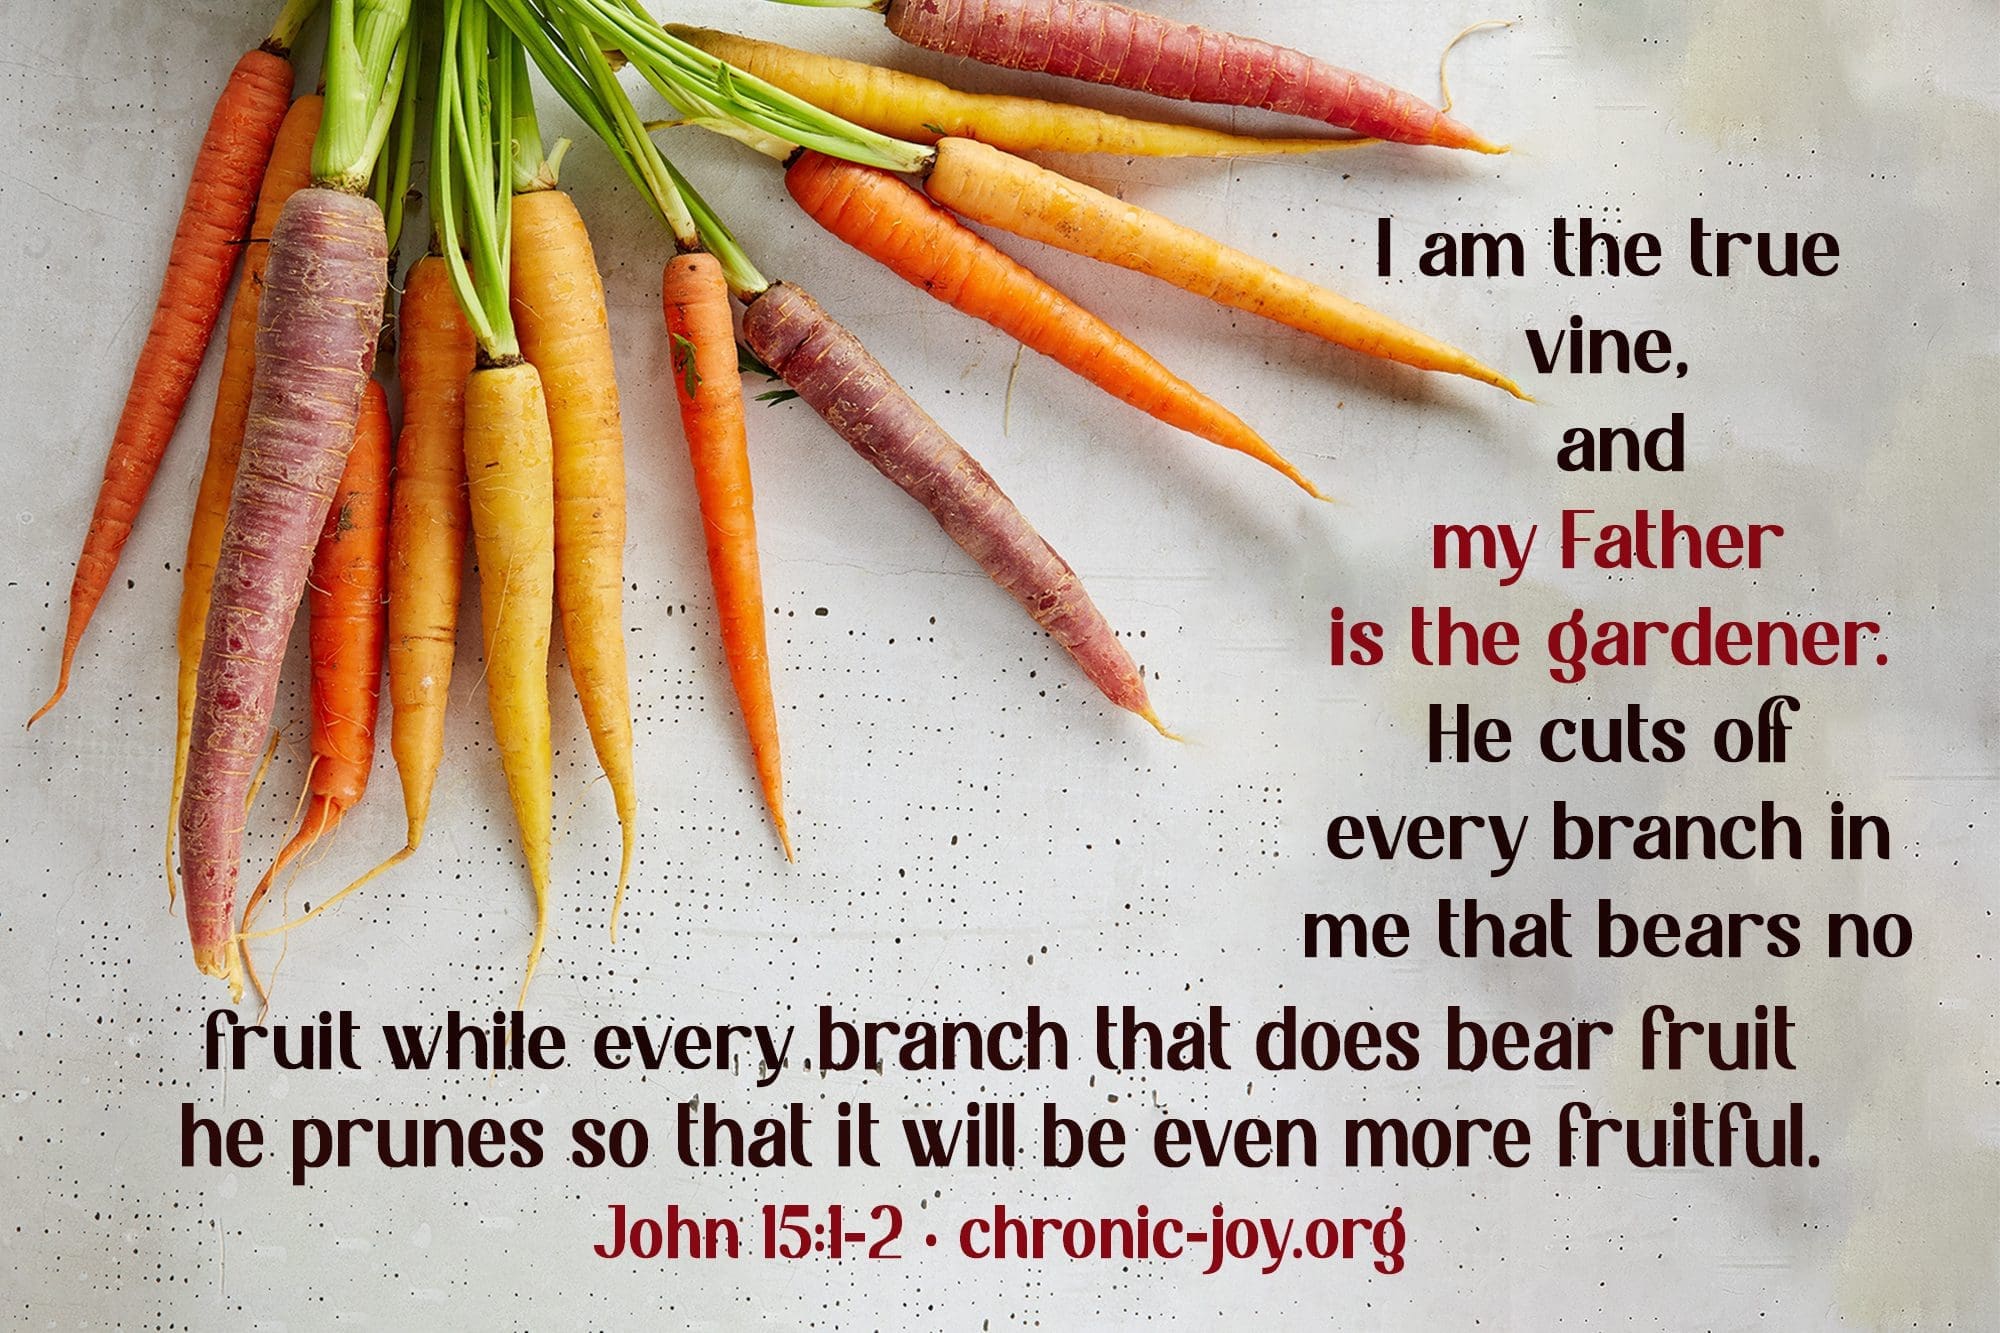 "I am the true vine, and my Father is the gardener. He cuts off every branch in me that bears no fruit, while every branch that does bear fruit he prunes so that it will be even more fruitful." John 15:1-2